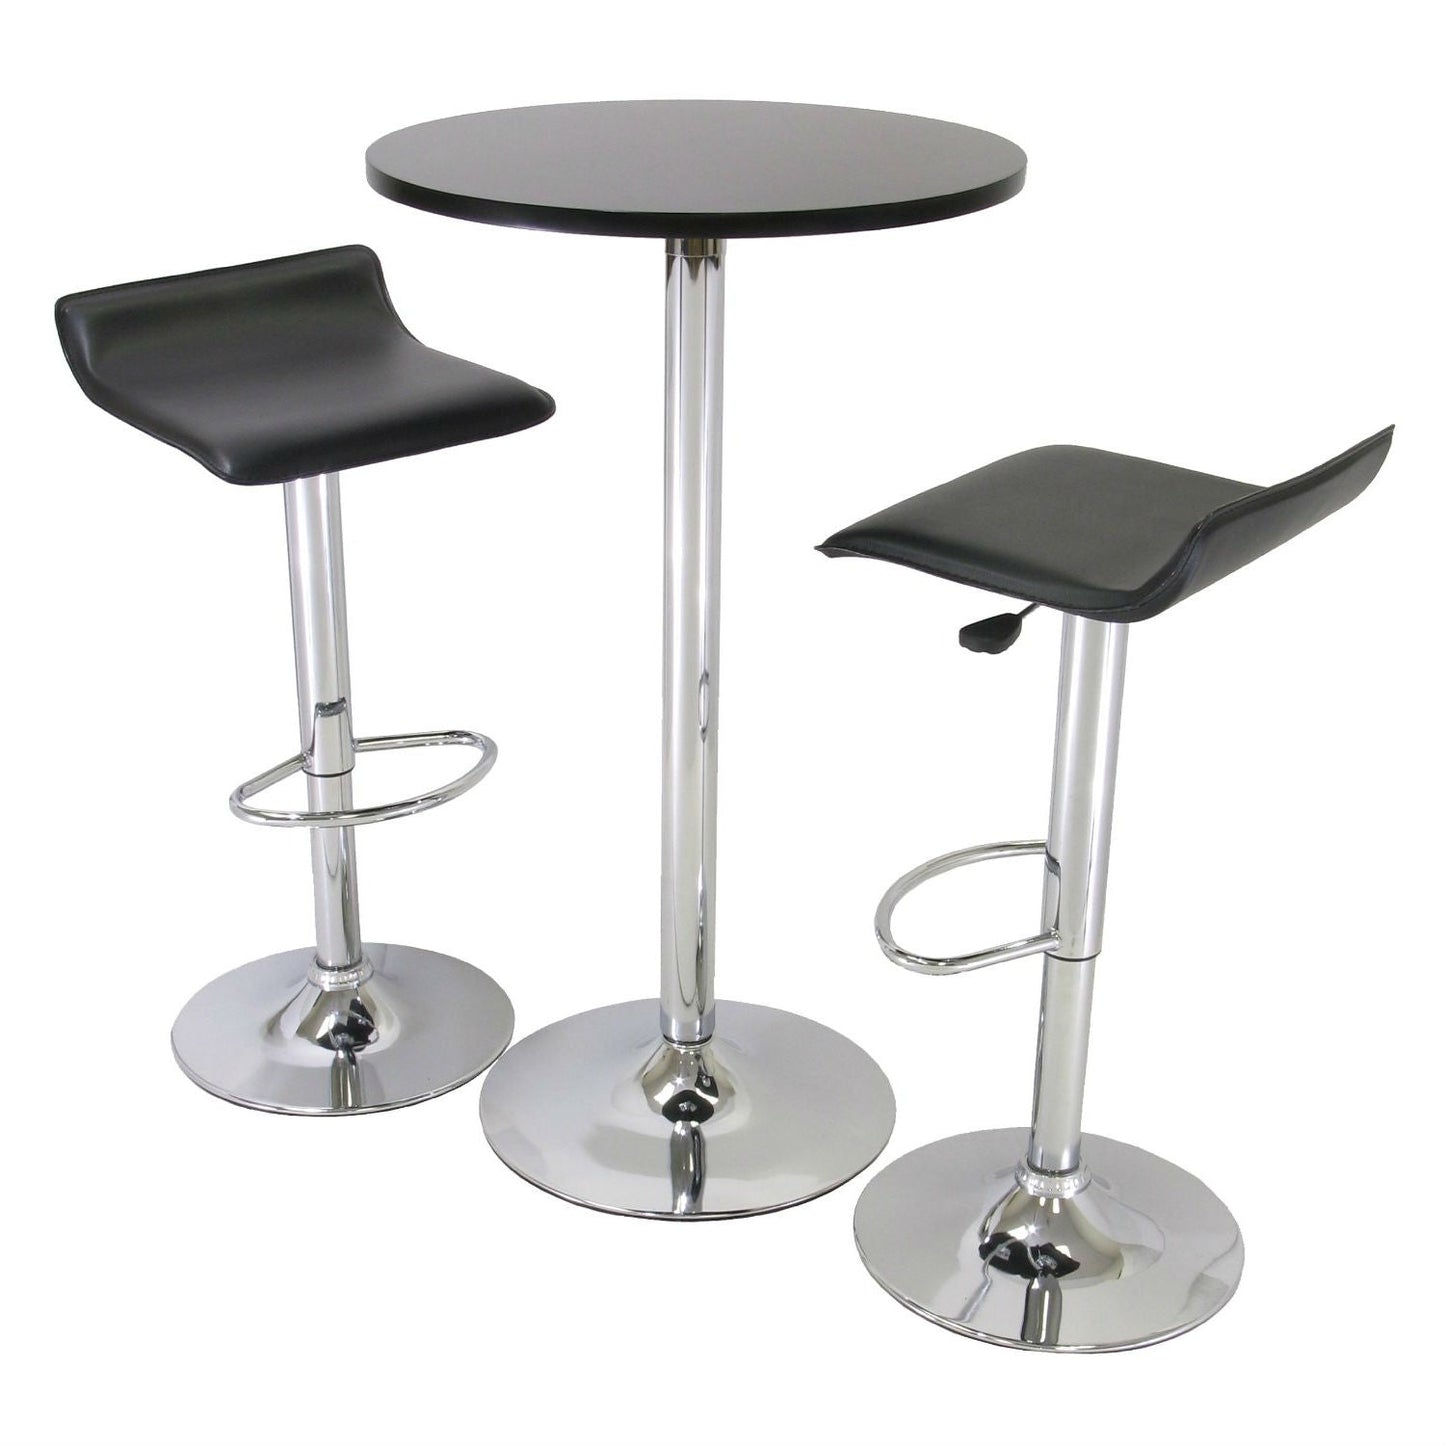 Dining > Dining Sets - 3 Piece Modern Dining Set With Bistro Table And Two Stools